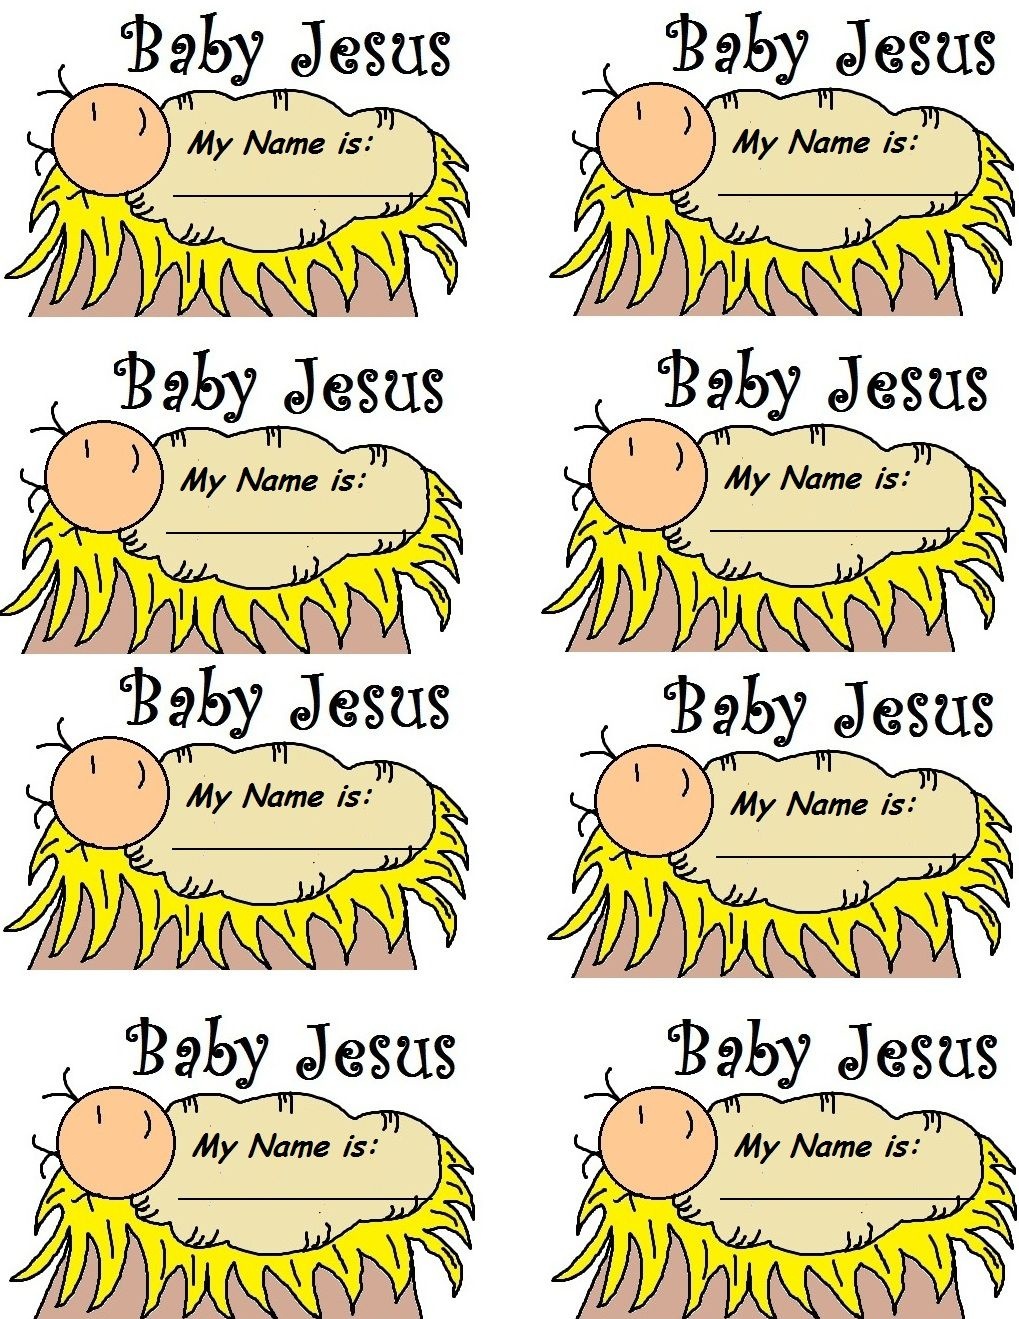 Baby Jesus In A Manger (See Black And White Template) | Christmas - Free Printable Christmas Plays For Sunday School